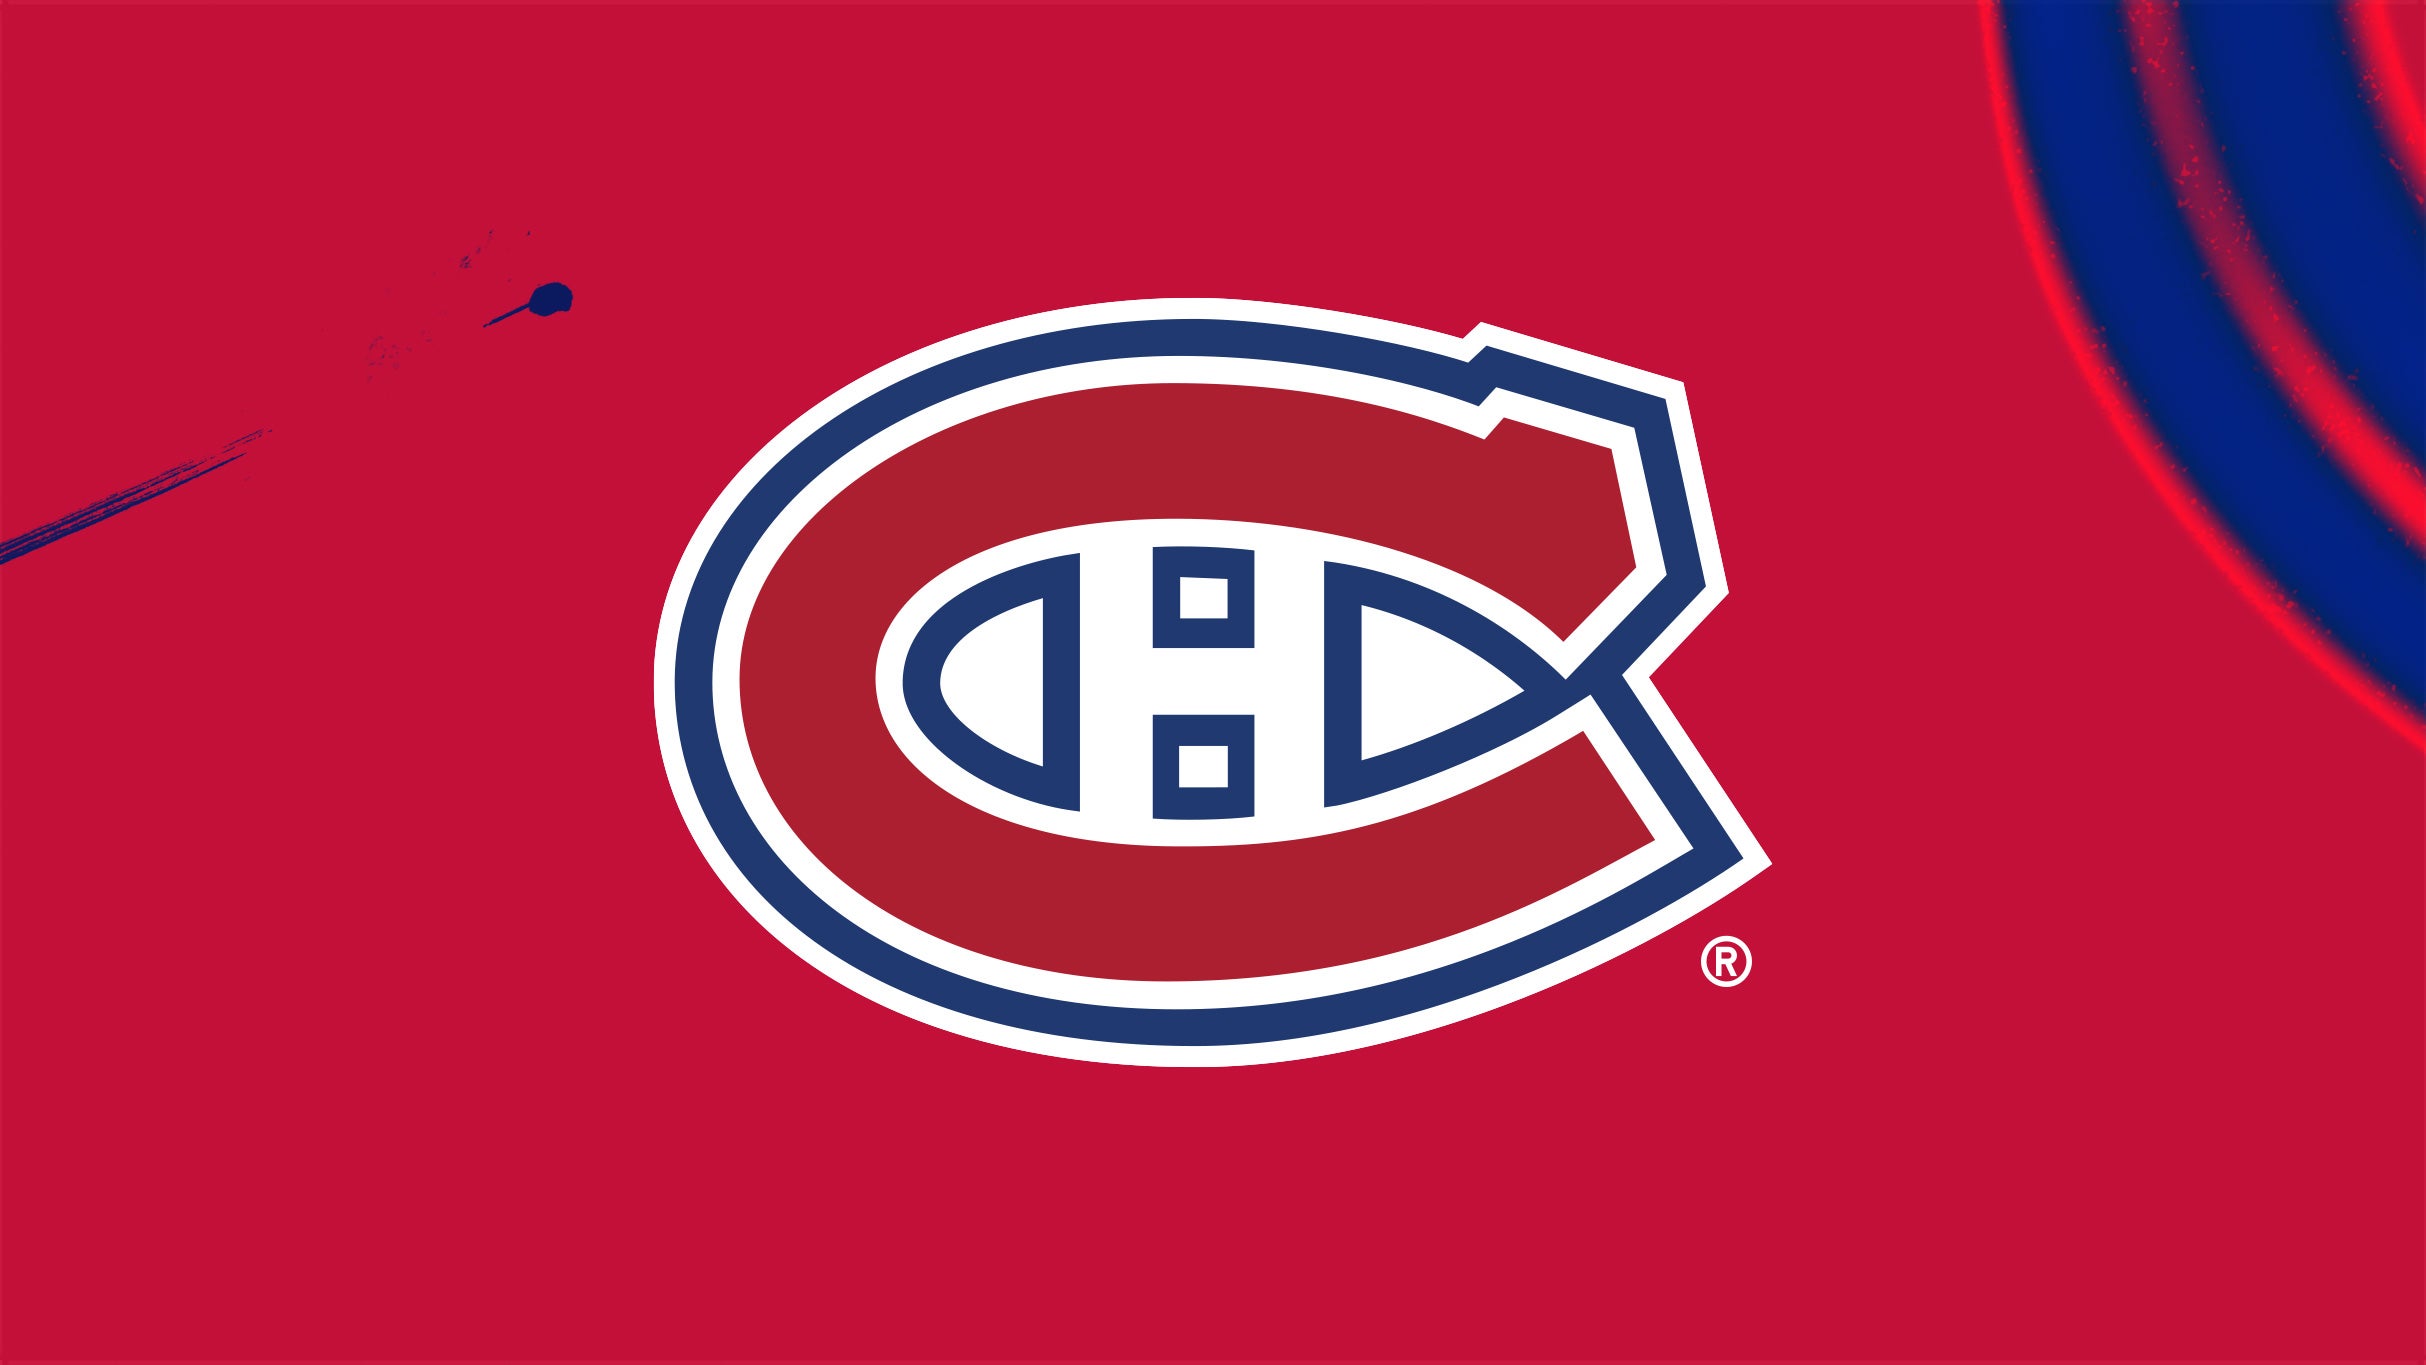 Montreal Canadiens vs. Los Angeles Kings in Montreal promo photo for Offre Or / Gold  presale offer code